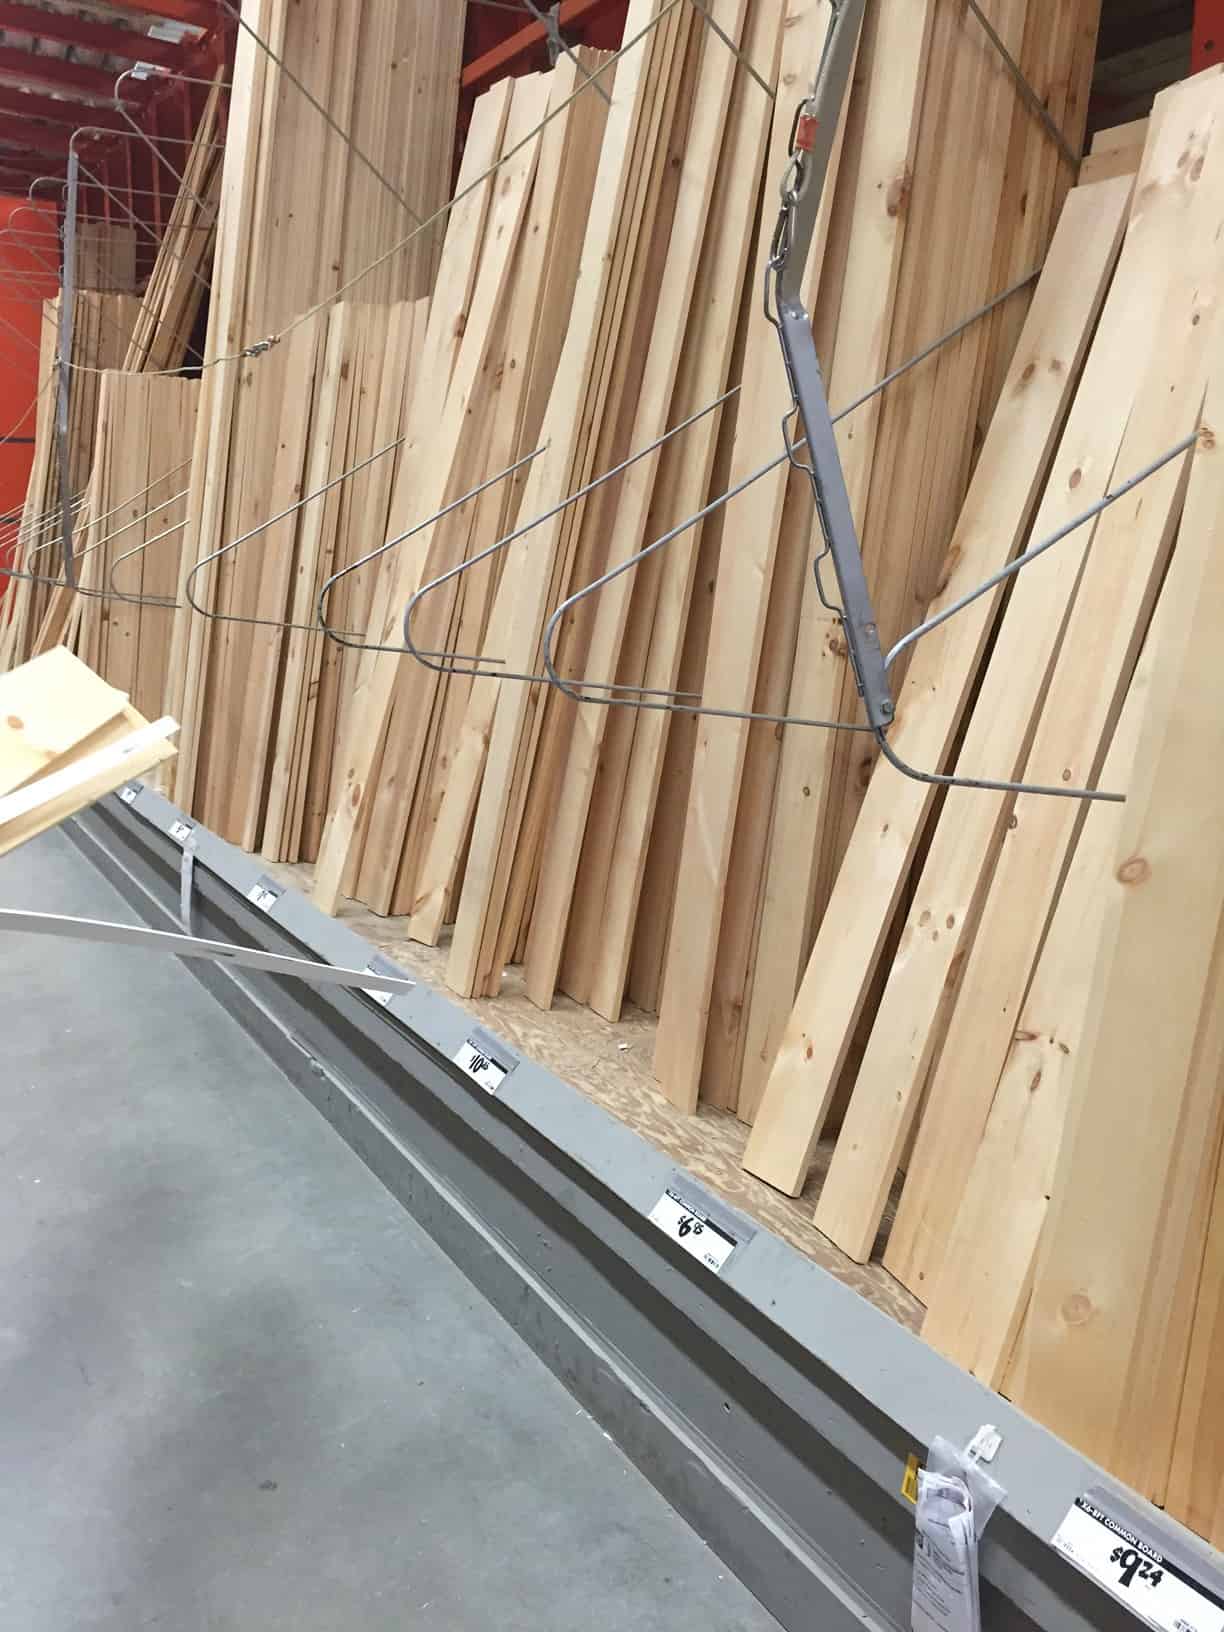 A shelf containing various planks of unpainted, unstained wood in a hardware store